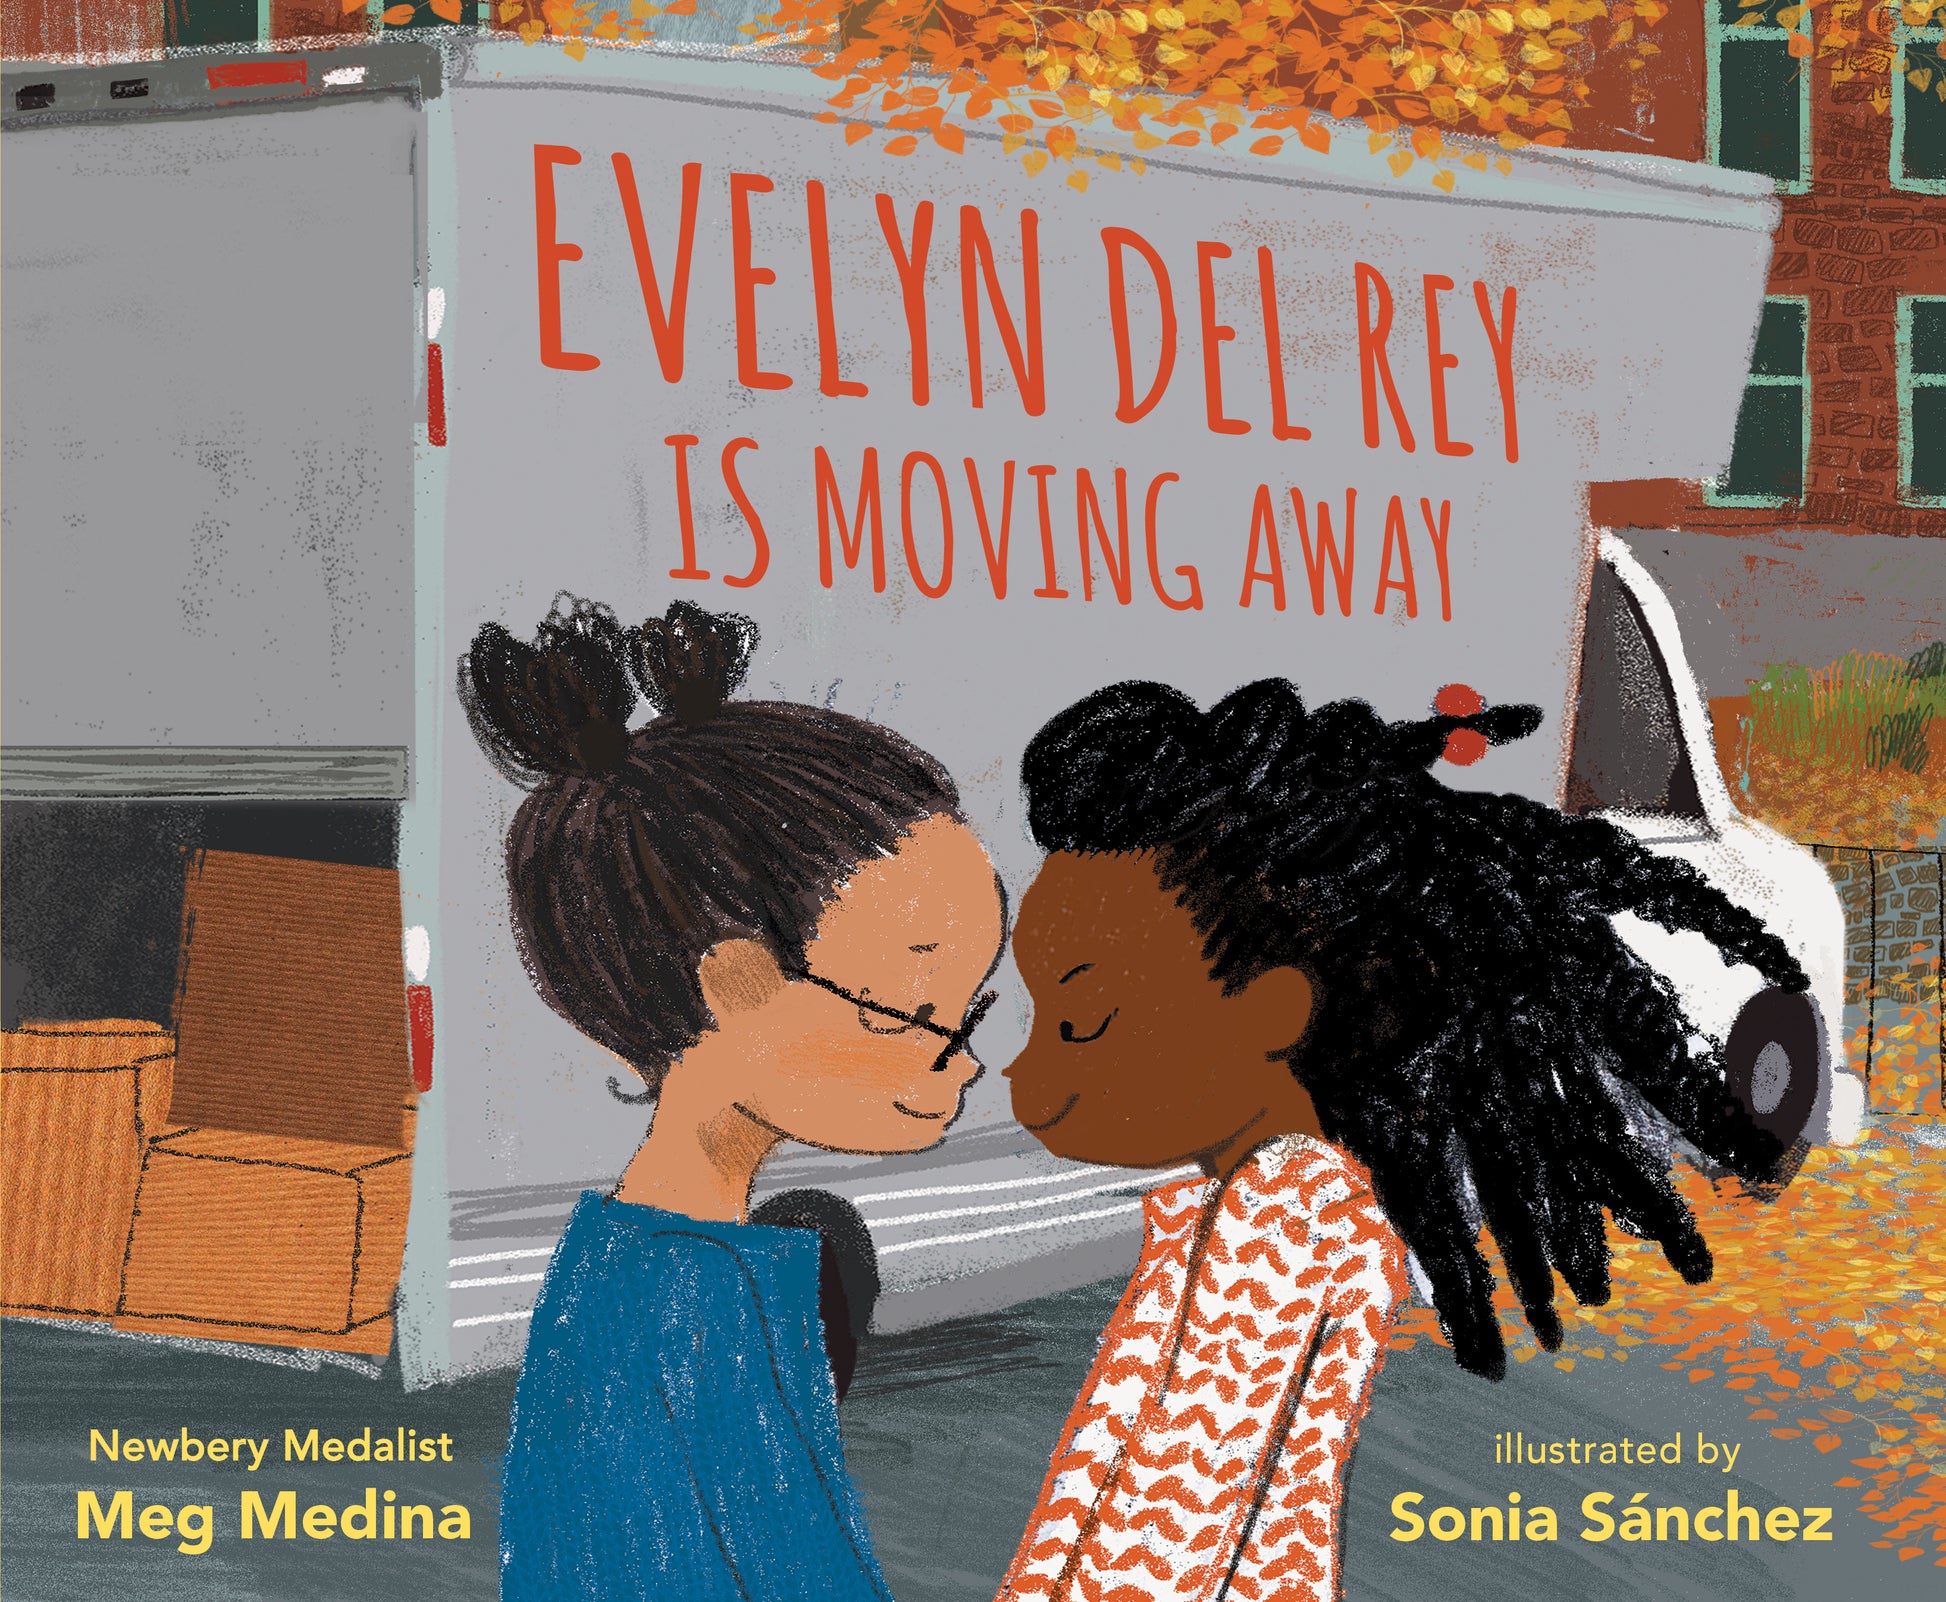 Evelyn Del Ray Is Moving Away by Meg Medina.  Two young girls face each other lovingly, a moving truck with boxes is in the background. 